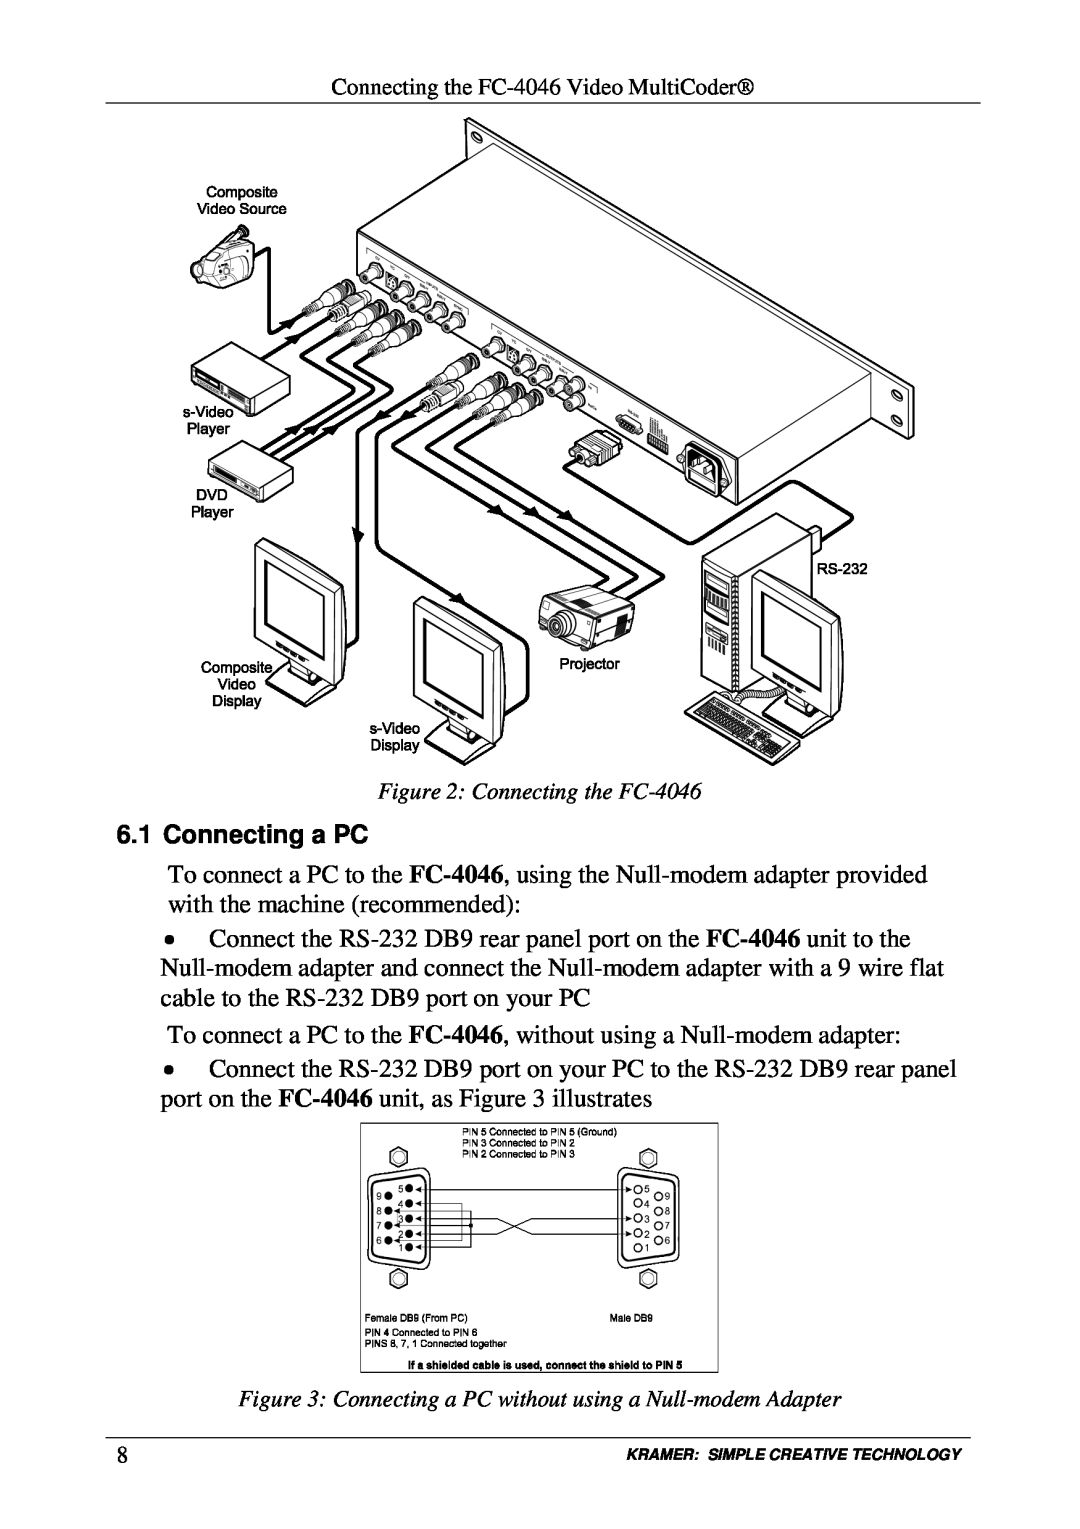 Kramer Electronics user manual Connecting a PC, Connecting the FC-4046 